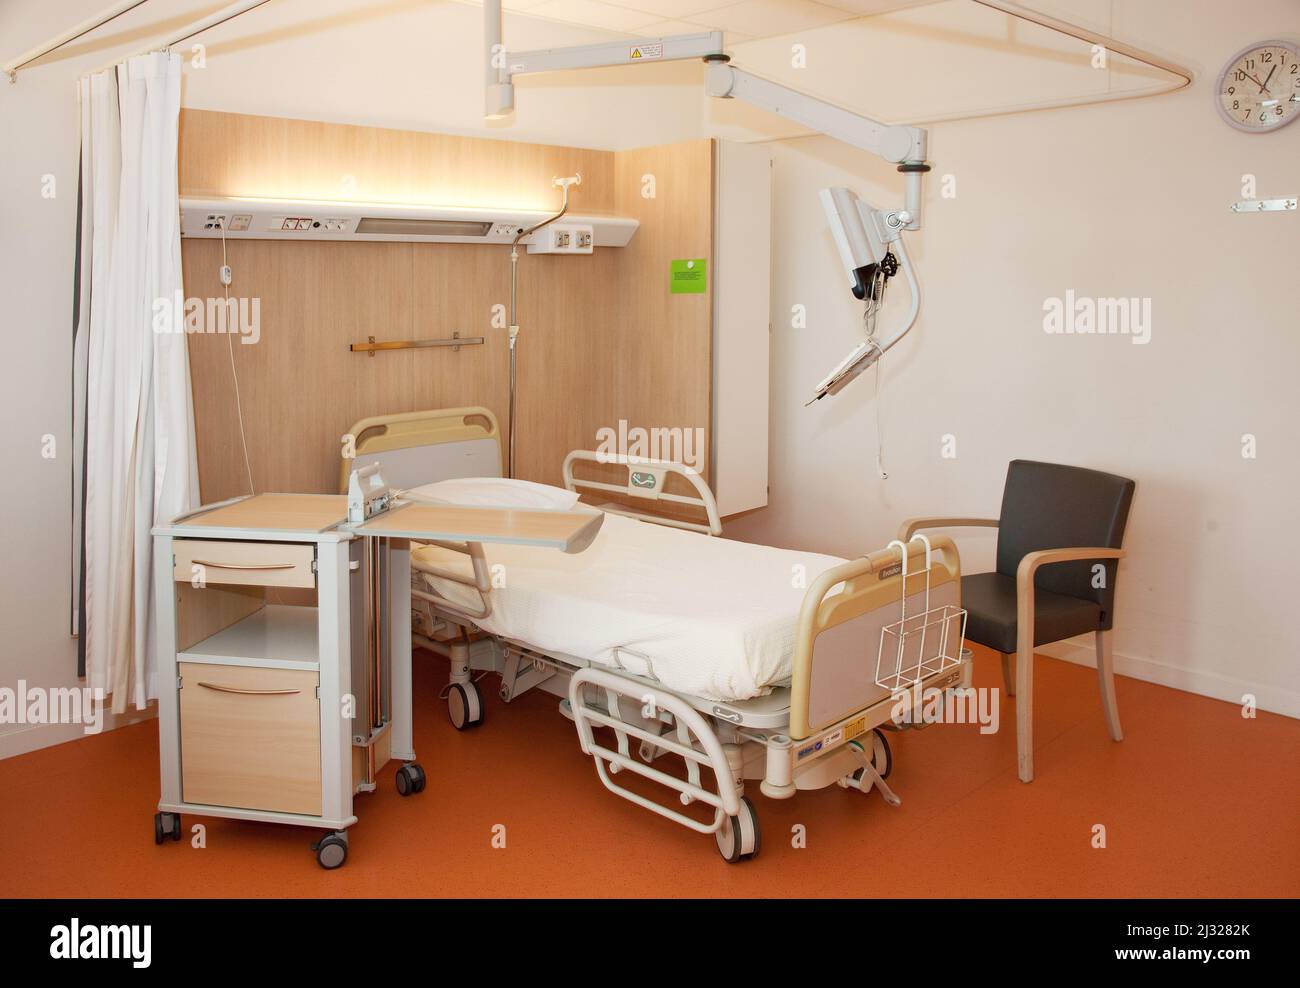 Netherlands, an hospital room with a bed, chair and pedestal cupboard Stock Photo